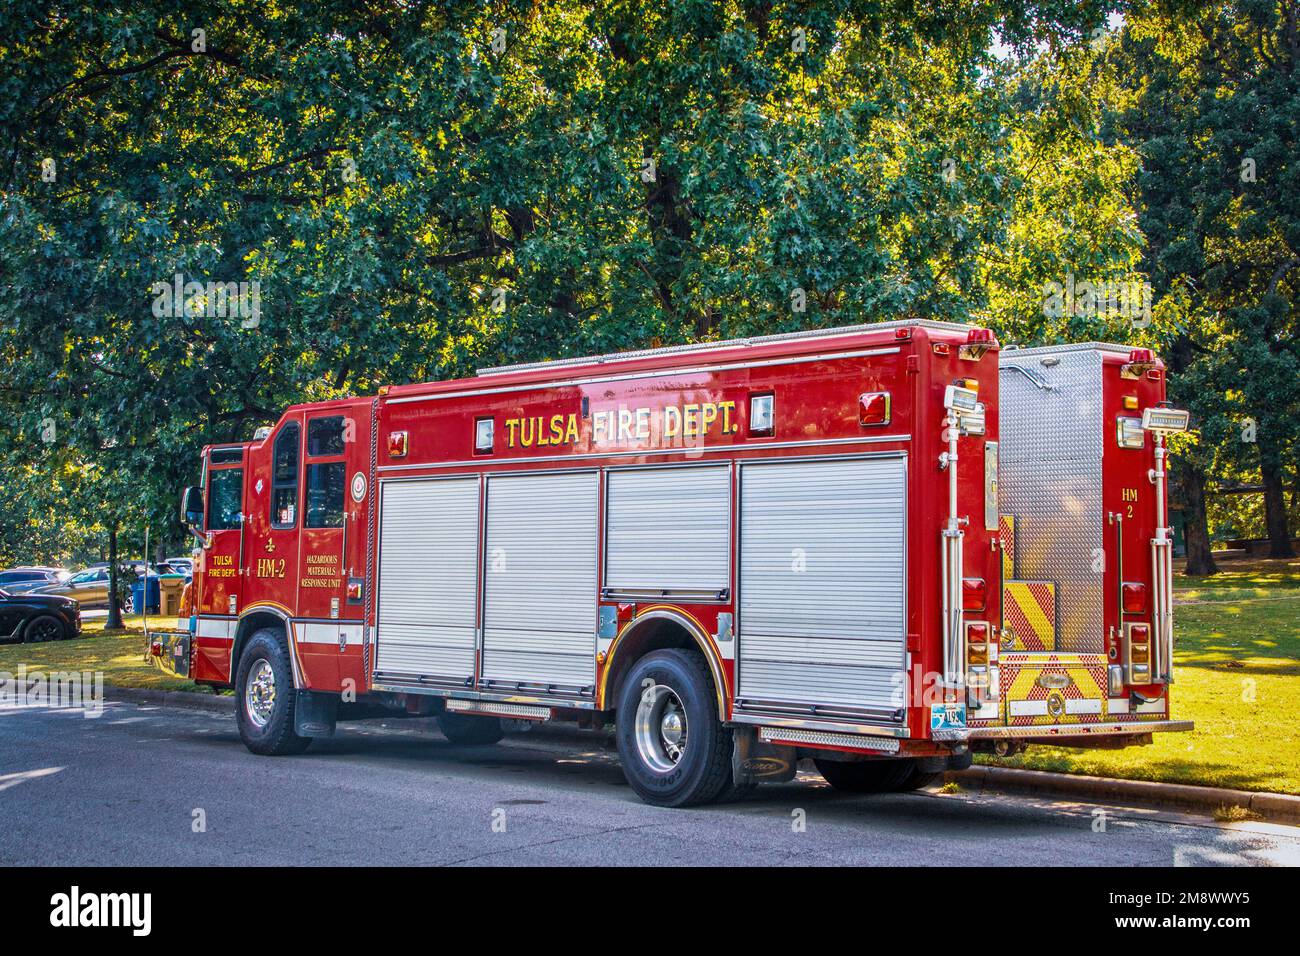 2022 09 17- Tulsa USA - Tulsa Fire Department Hazard Materials Response Unit Truck parked by curb in leafy park - Red with sliding doors on side and m Stock Photo